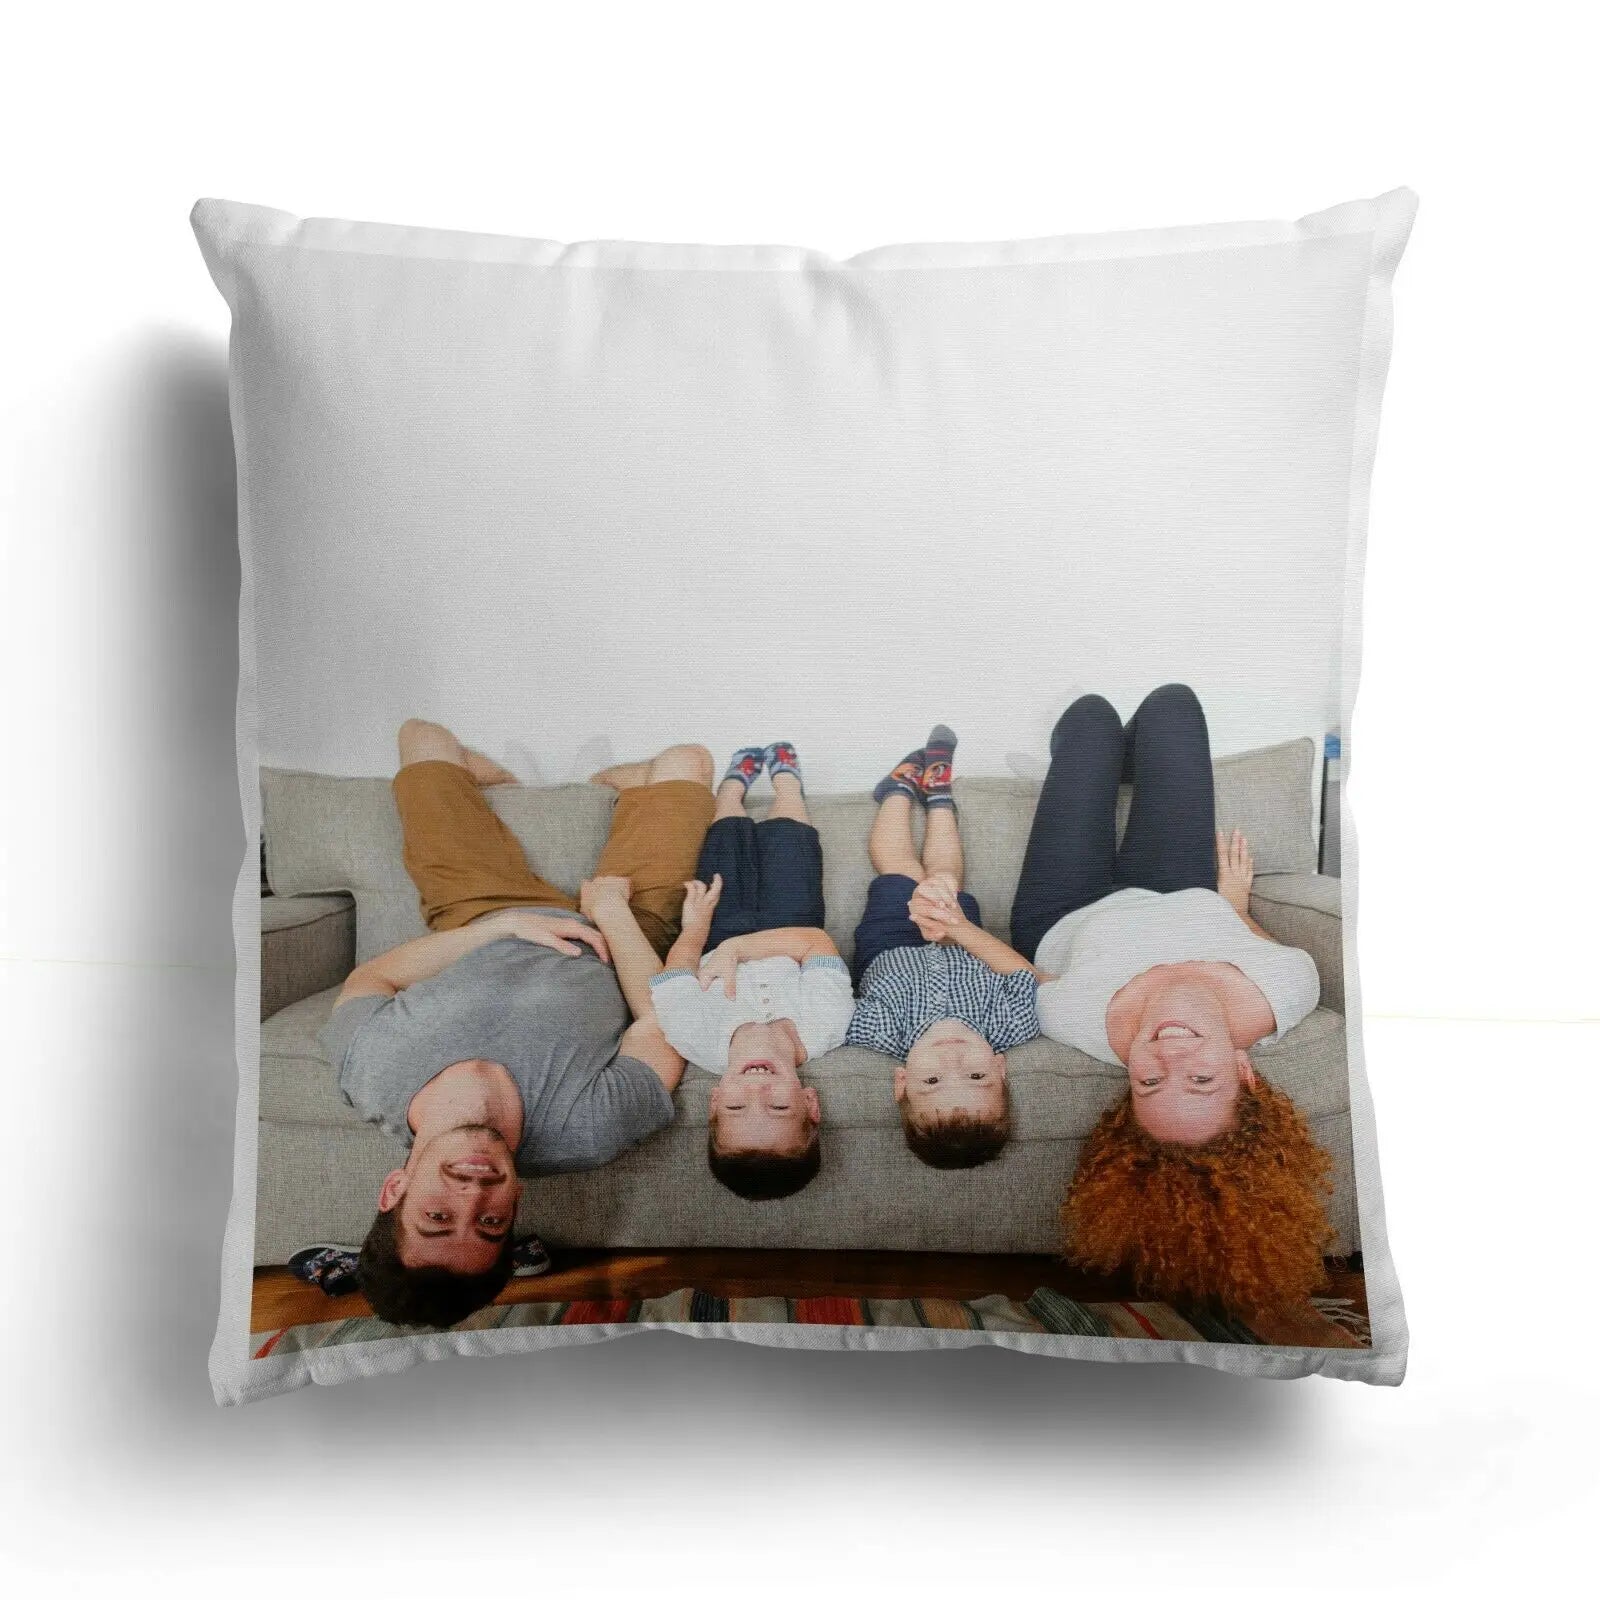 Personalised Cushion 1 Image Perfect Gift Décor - Fathers Day Gift